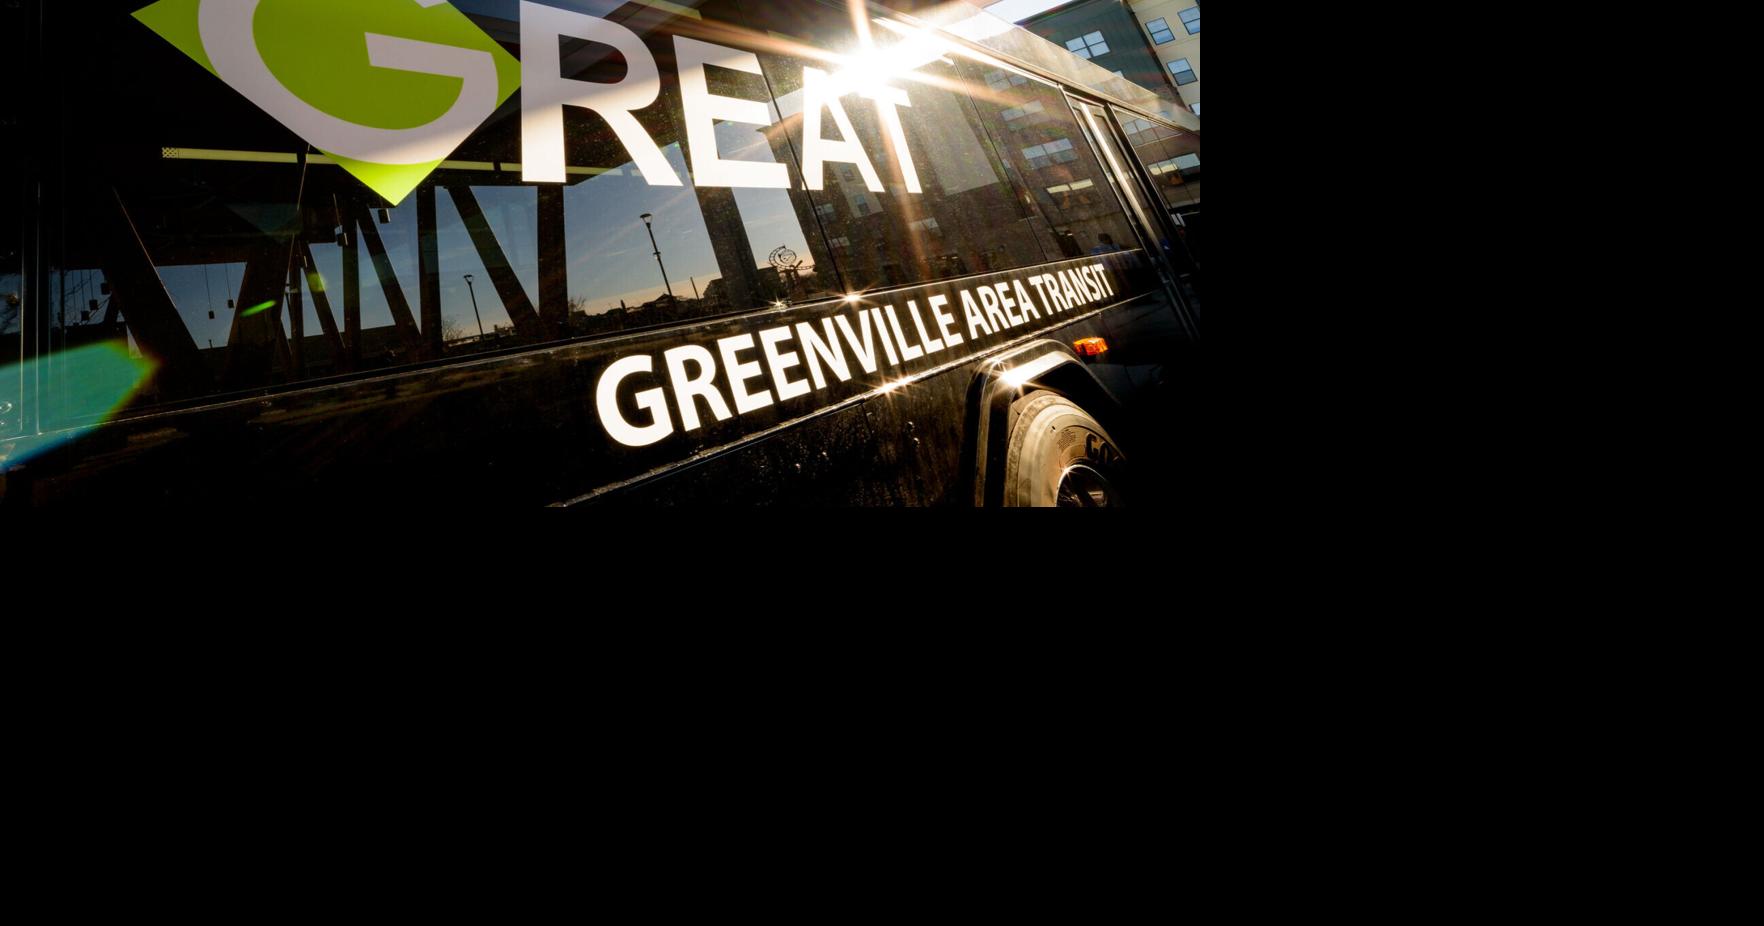 Consultants discuss GREAT route changes with Greenville City Council